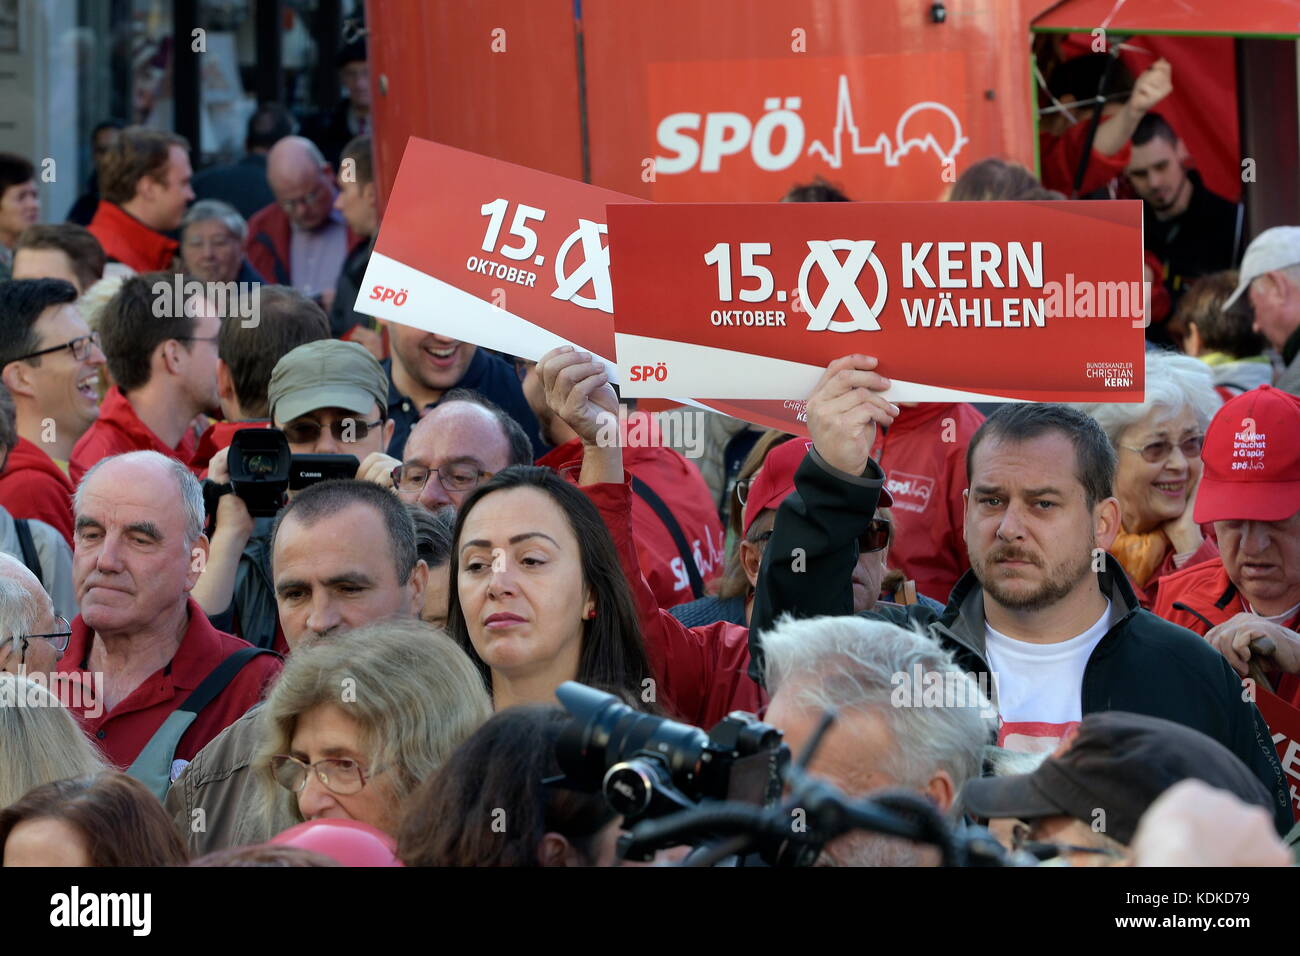 Vienna, Austria. 14 October 2017. Final rally of the SPÖ (Social Democratic Party of Austria) at the Viktor Adler market. Picture shows supporters of the SPÖ'.  .Credit: Franz Perc / Alamy Live News Stock Photo